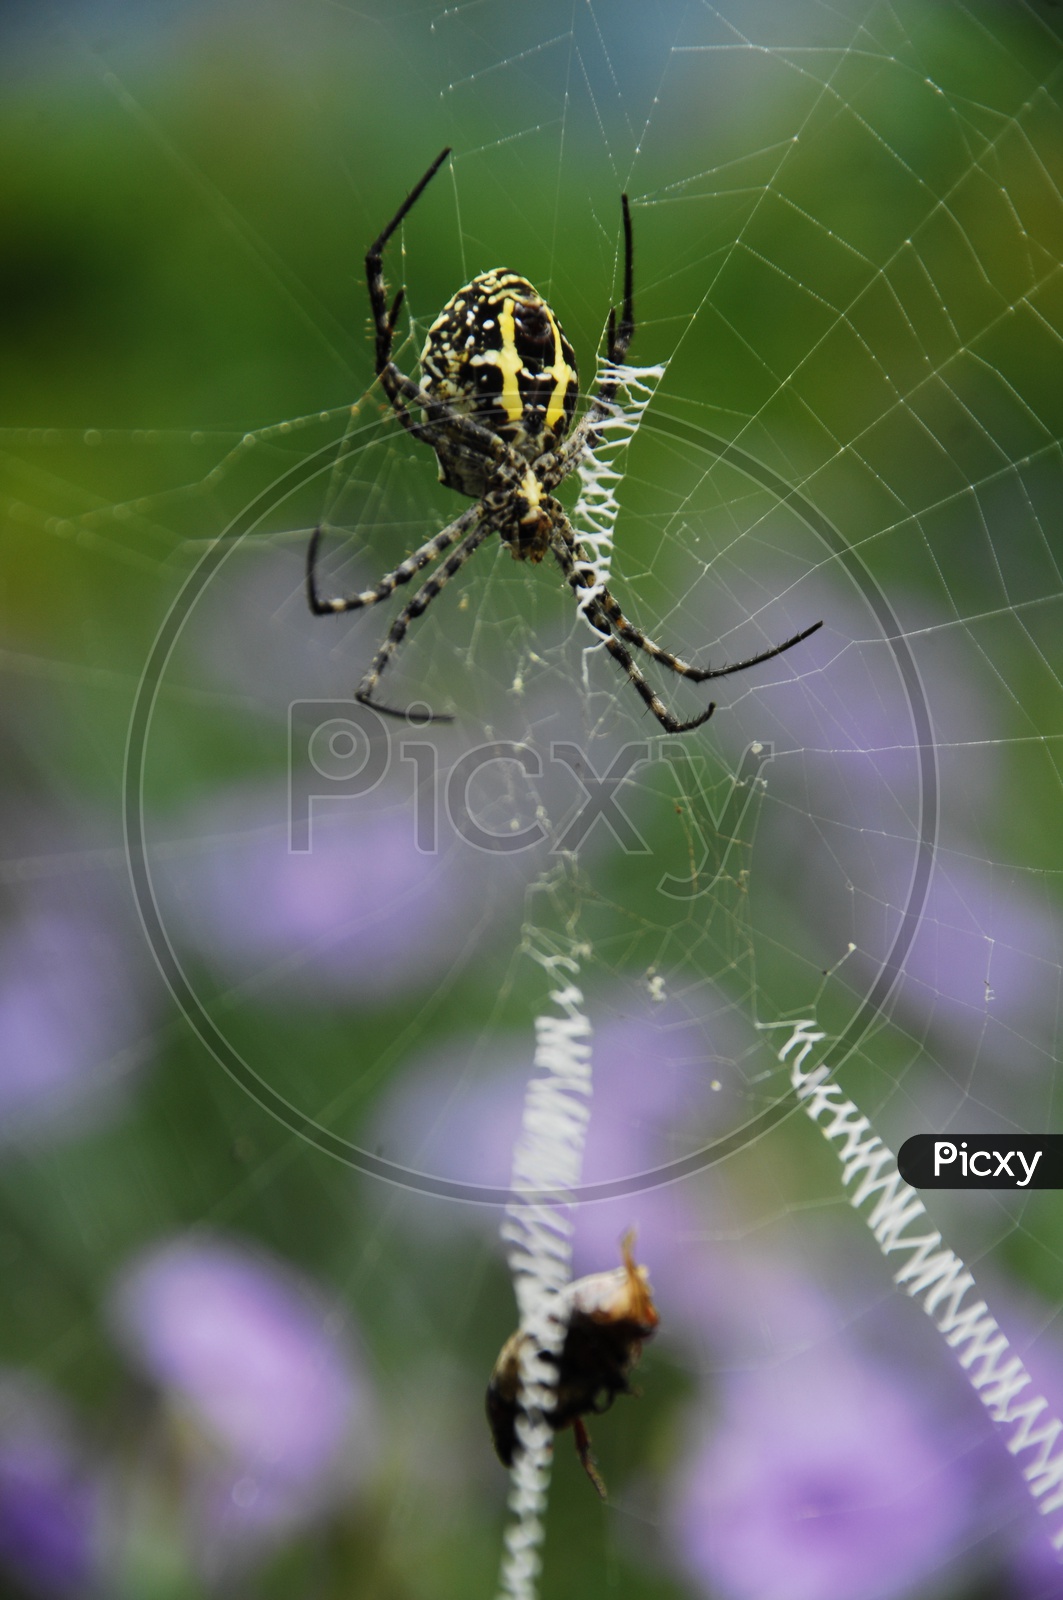 A Spider in a web